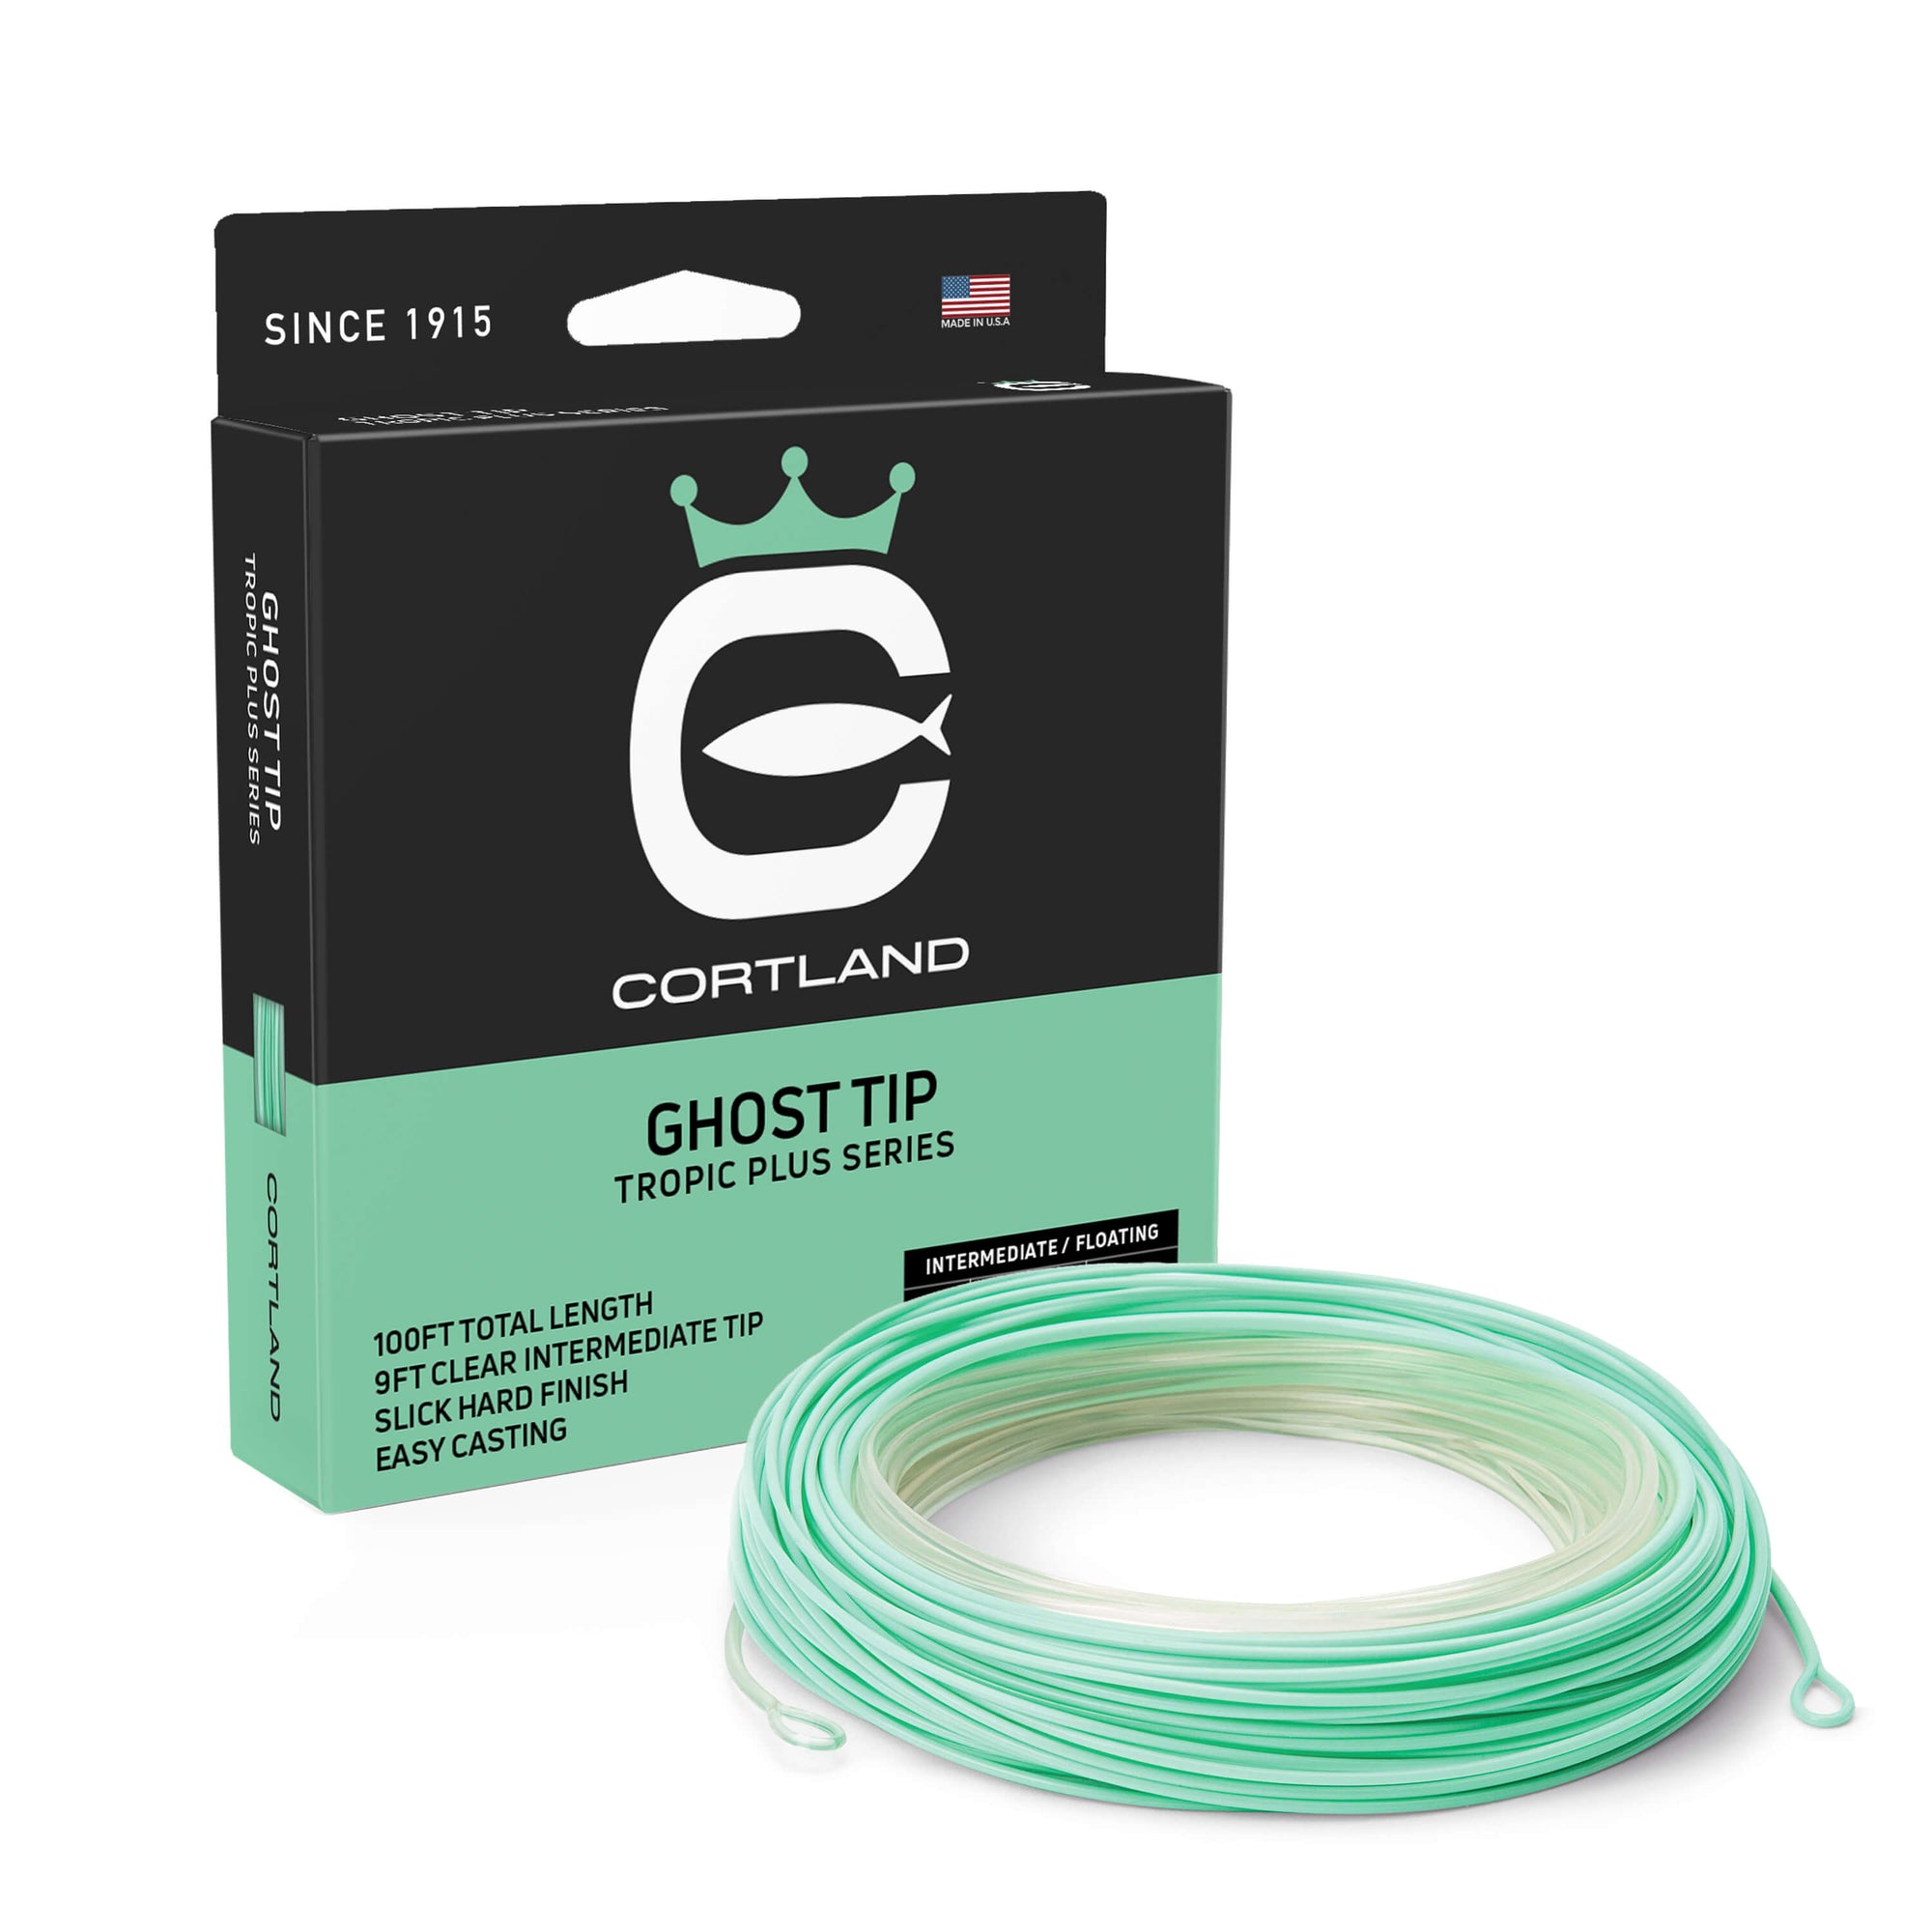 Ghost Tip Fly Line Box and Coil. The coil is clear and seafoam. The box has the Cortland Logo and is black and light blue.